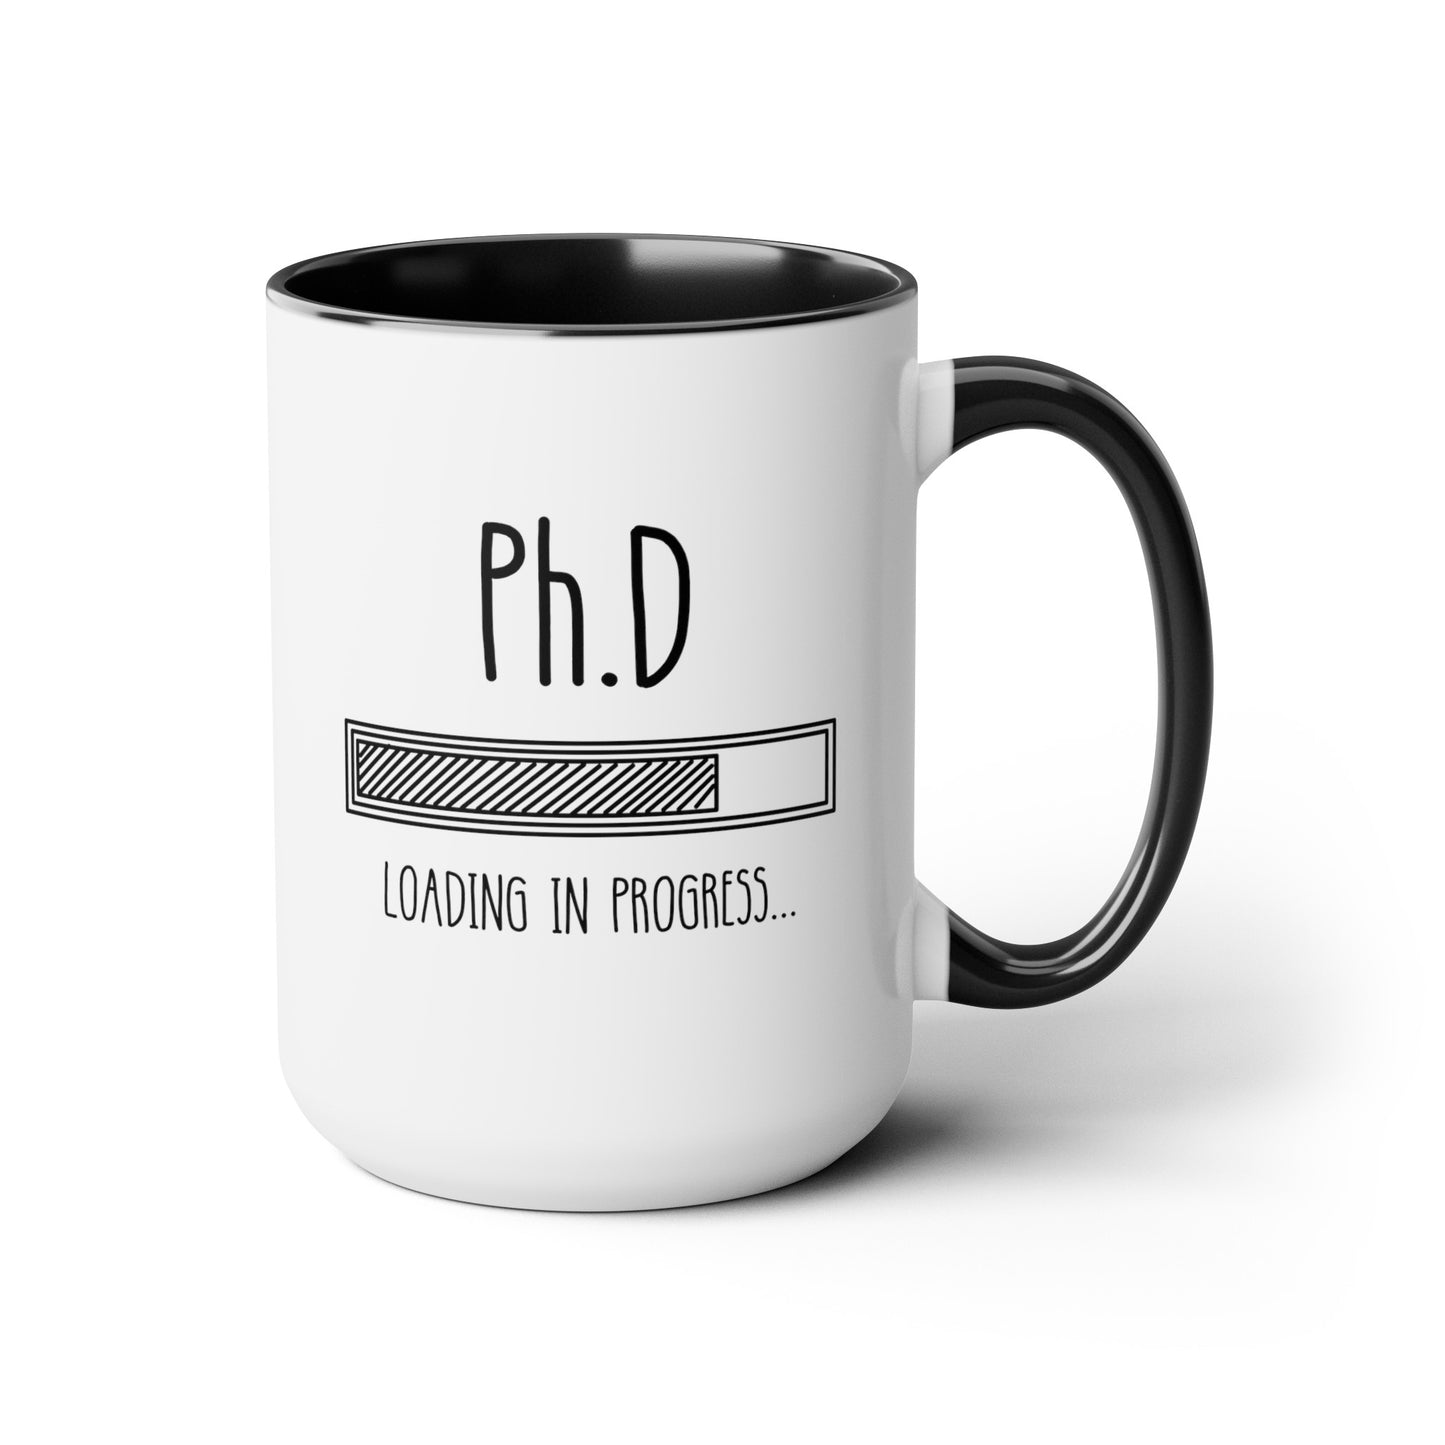 Ph.D Loading 15oz white with black accent funny large coffee mug gift for doctor PhD degree student graduation personalized te waveywares wavey wares wavywares wavy wares